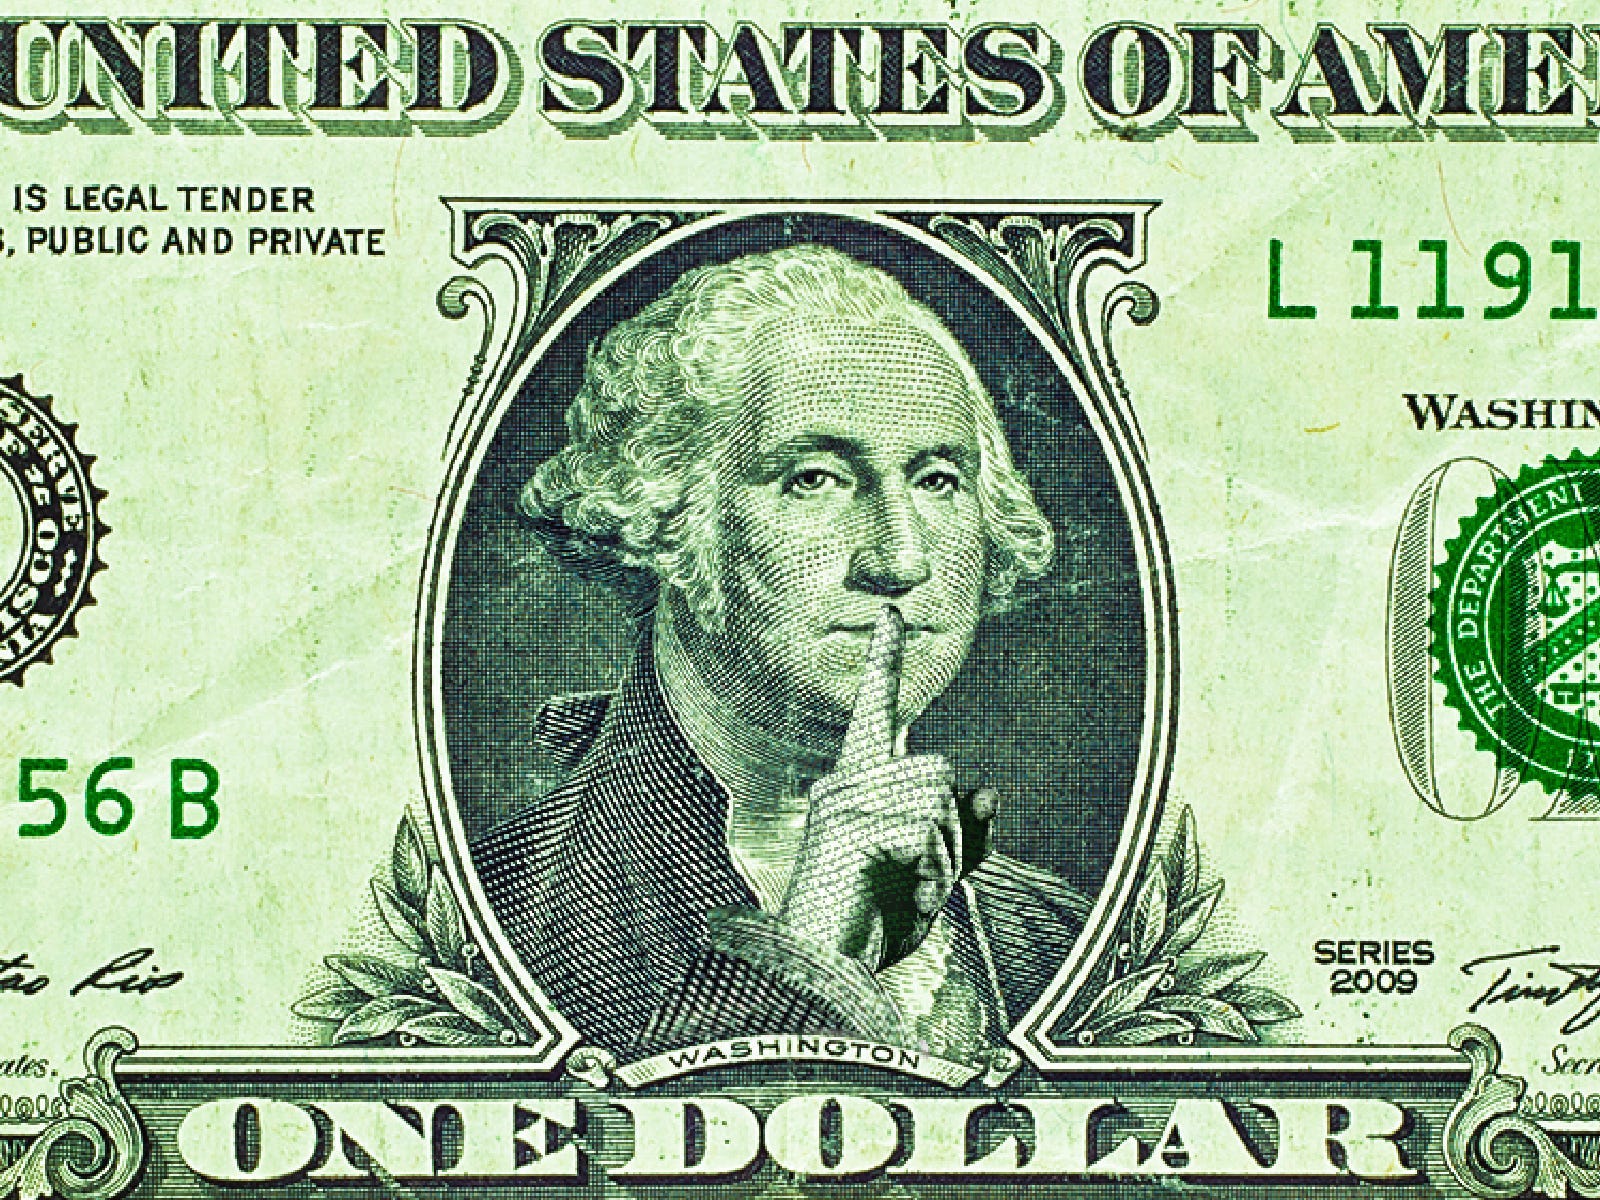 A US one dollar bill of George Washington with a finger over his lips to hush the viewer.